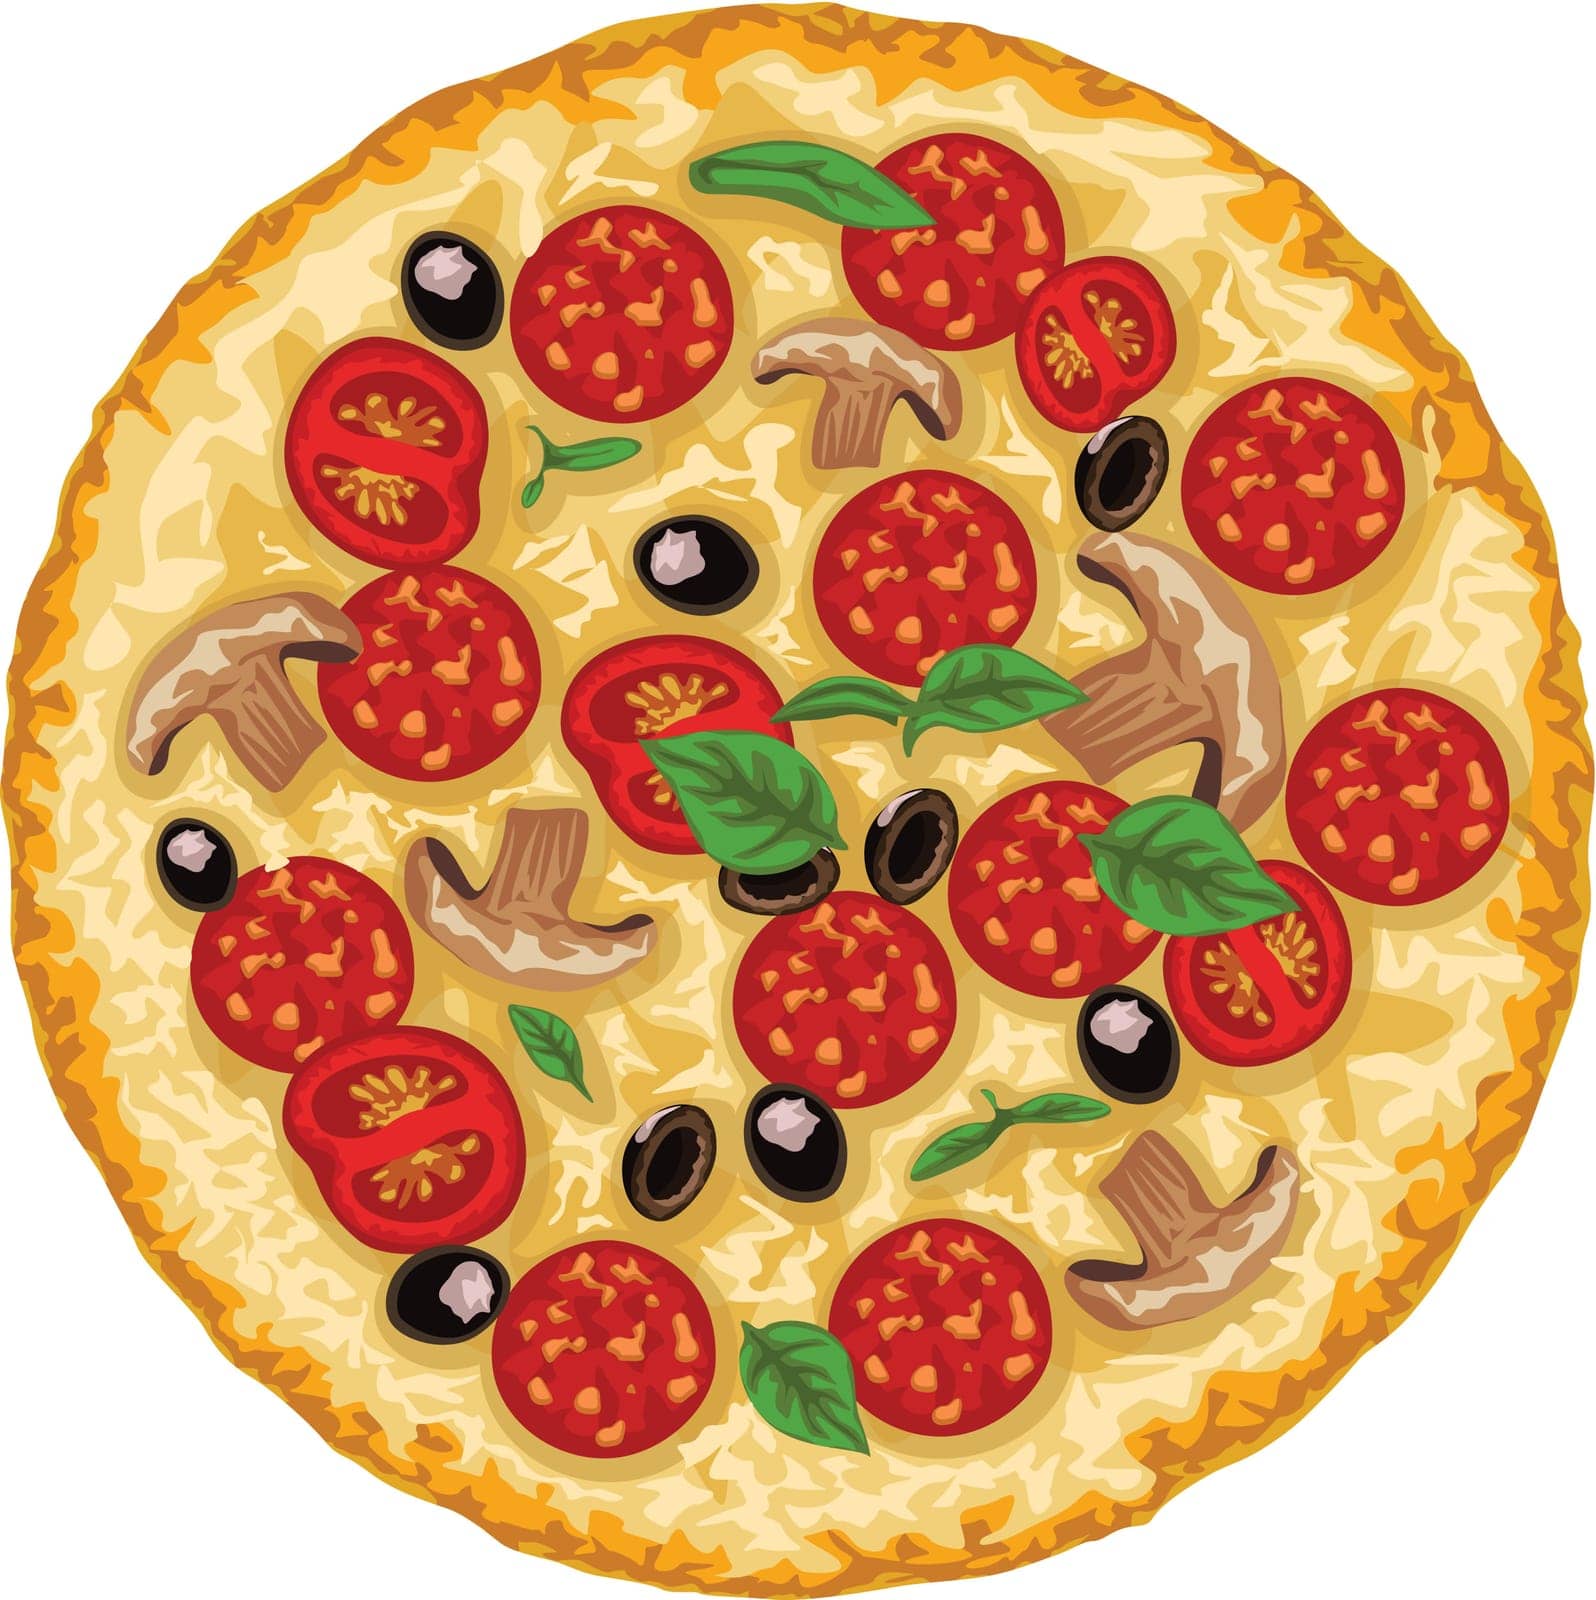 illustration of isolated round meat and vegetables tasty pizza on white background